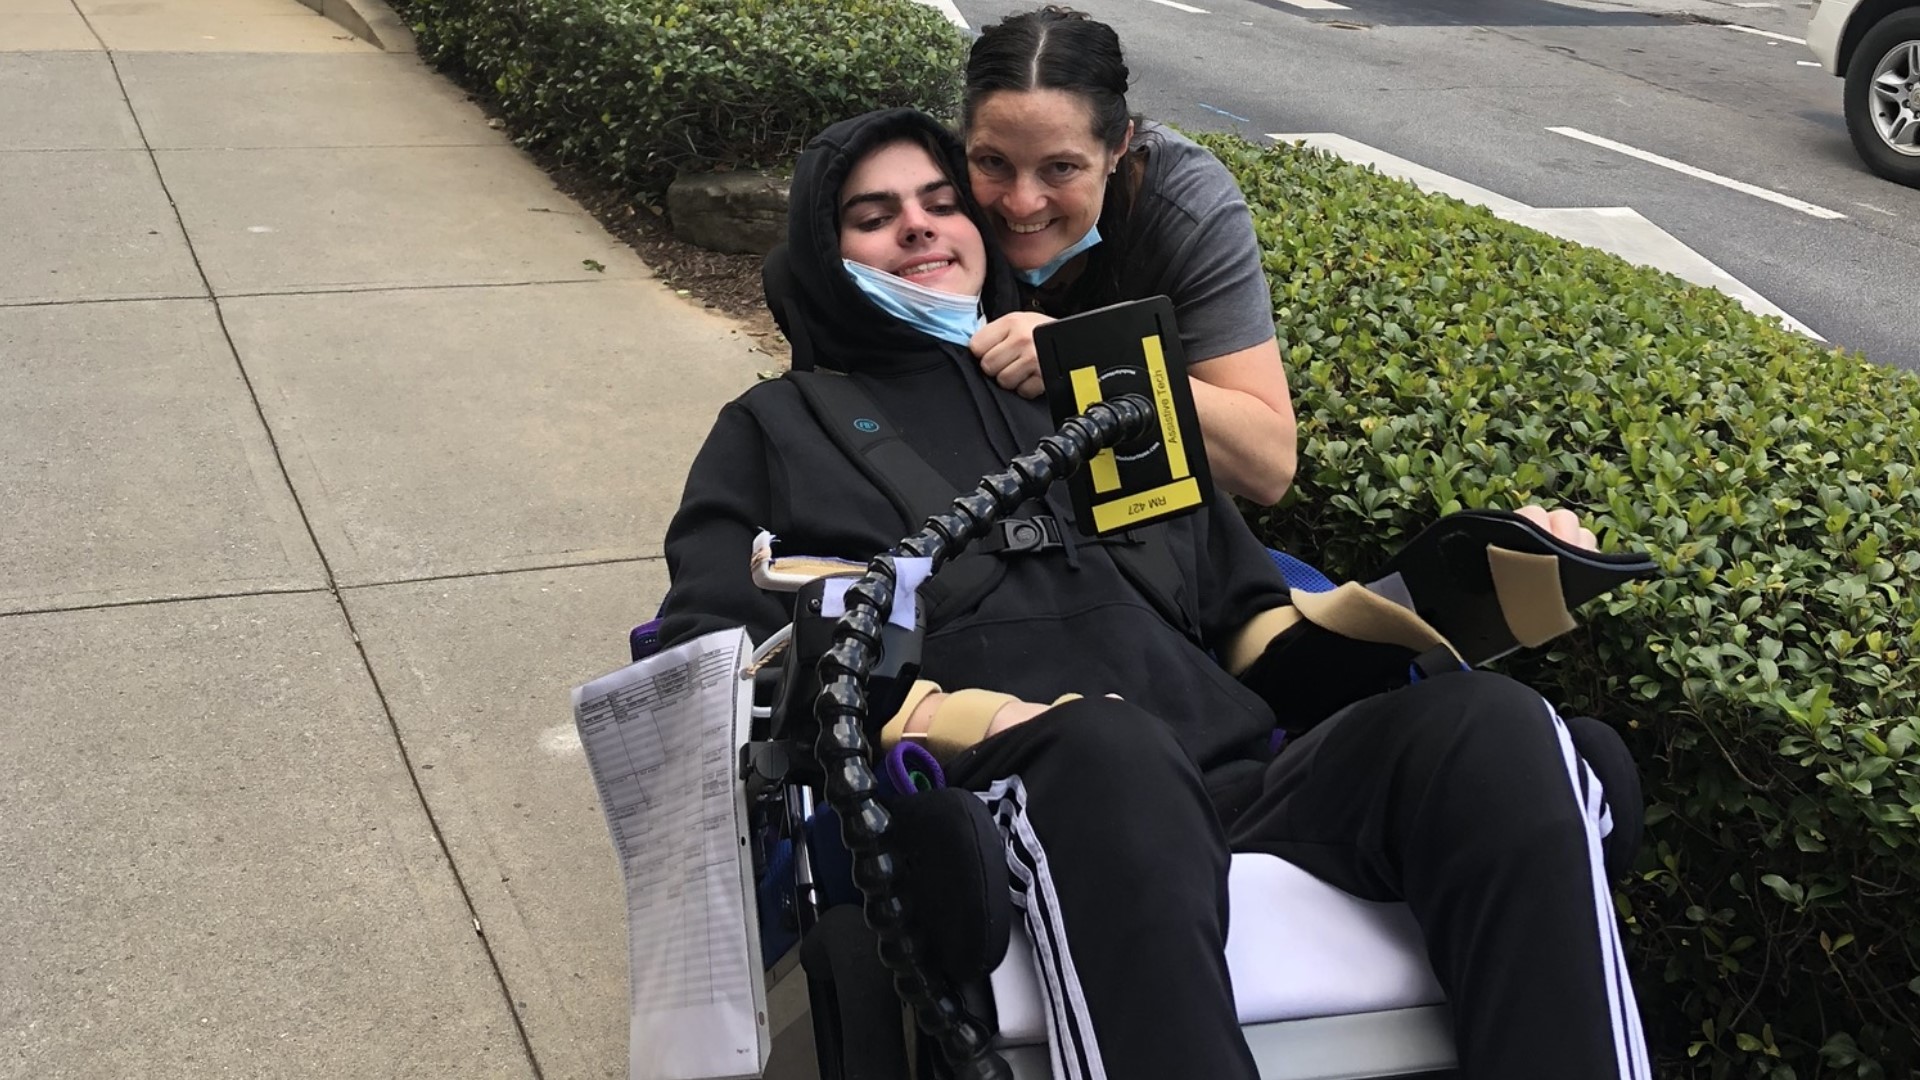 In the summer of 2021, a diving accident left 16-yr-old Jack Weeks paralyzed from his chest down. The Gorham teen is now facing his new challenges with grace.